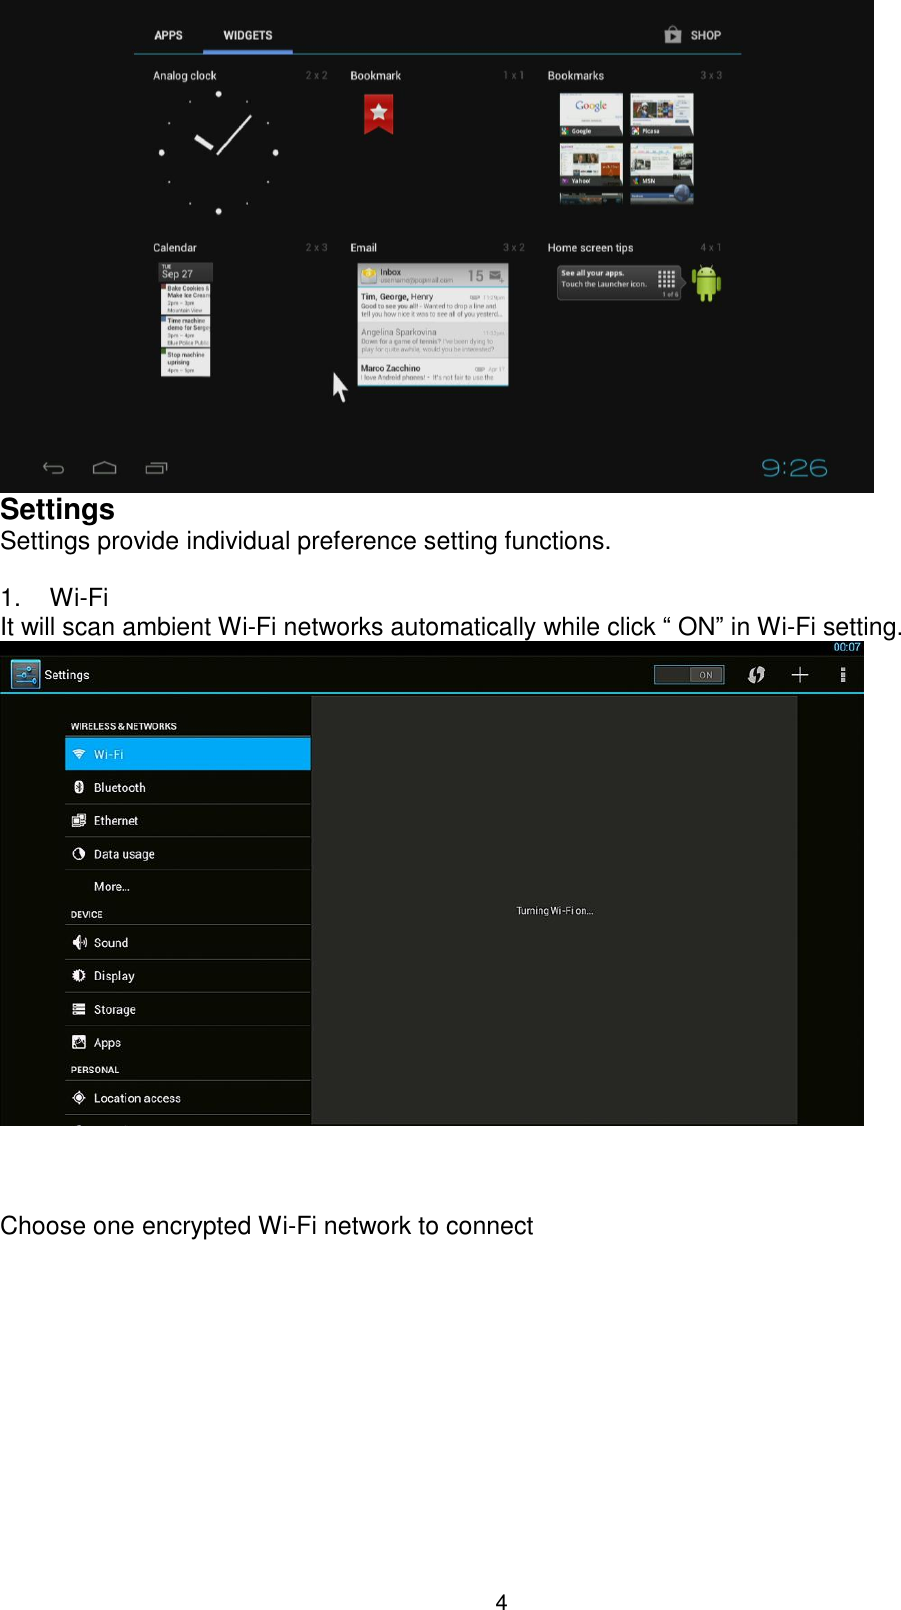  4   Settings Settings provide individual preference setting functions.  1.    Wi-Fi It will scan ambient Wi-Fi networks automatically while click “ ON” in Wi-Fi setting.        Choose one encrypted Wi-Fi network to connect                